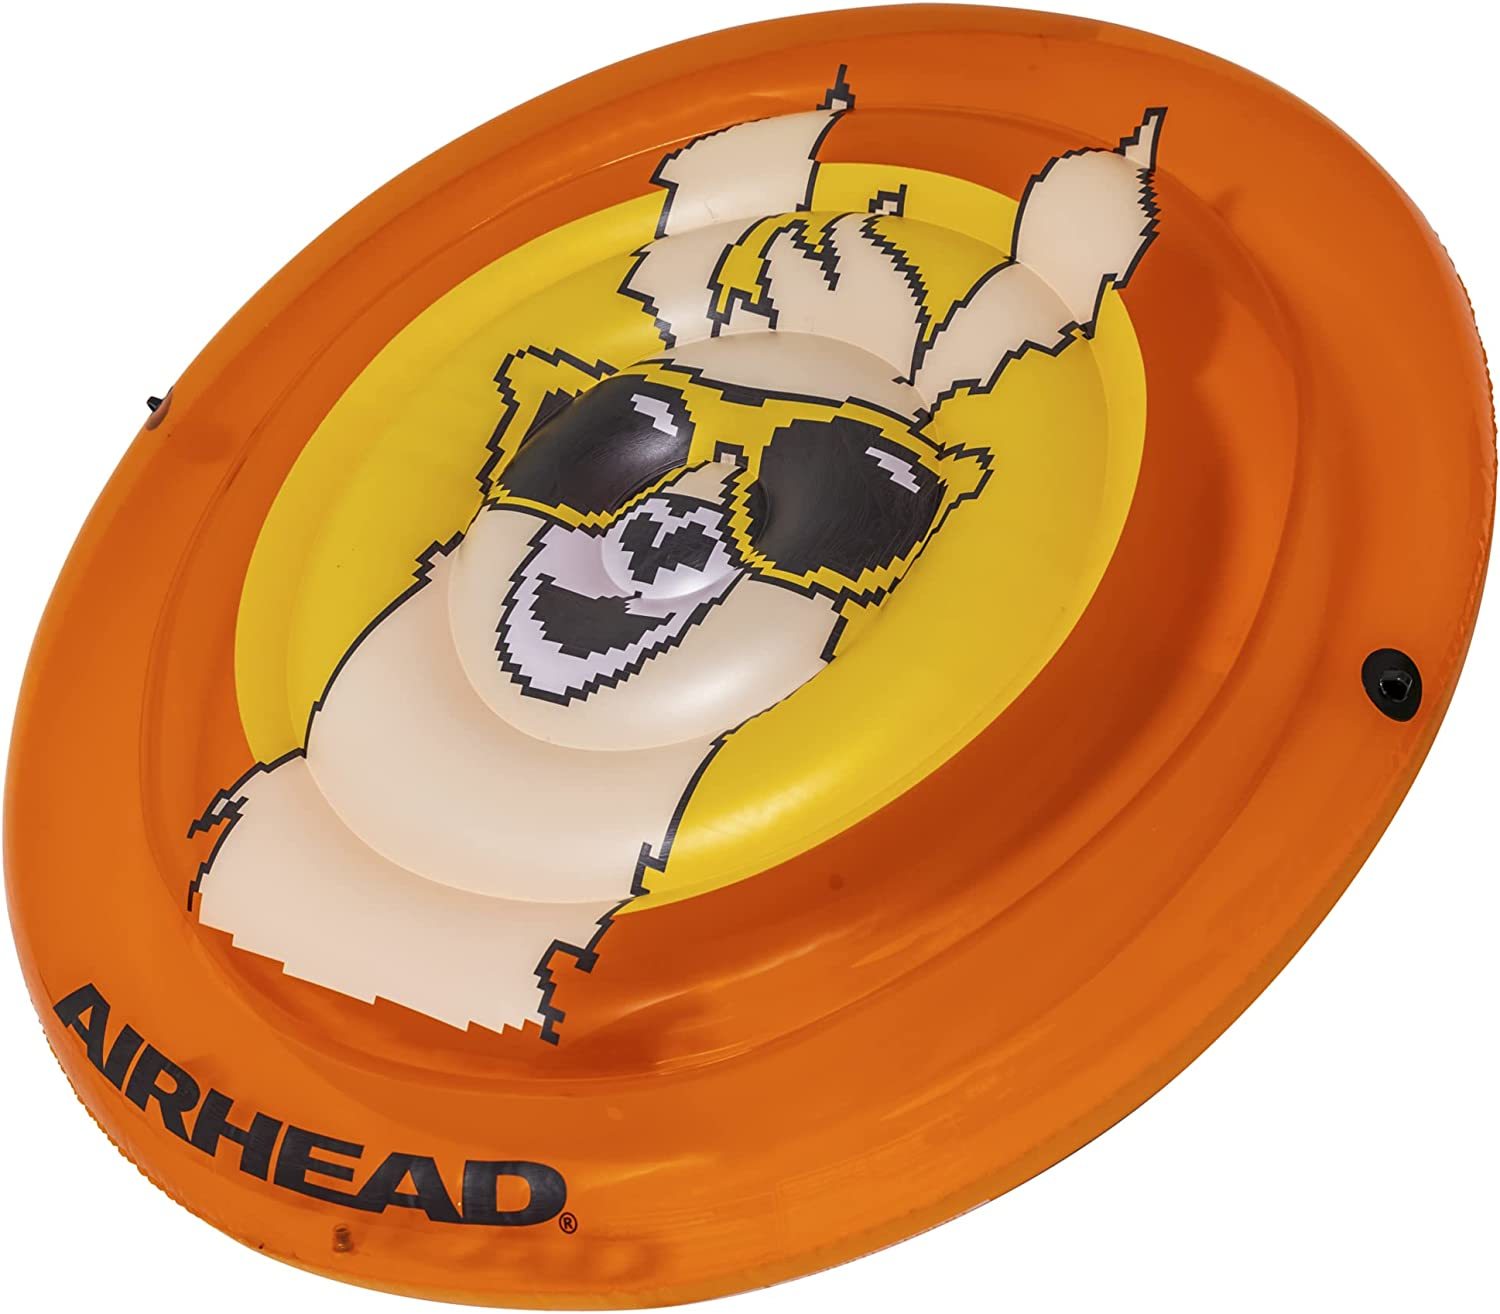 Multiple Styles Are Available For The Airhead Pixelated Inflatable Pool Float. - $34.95